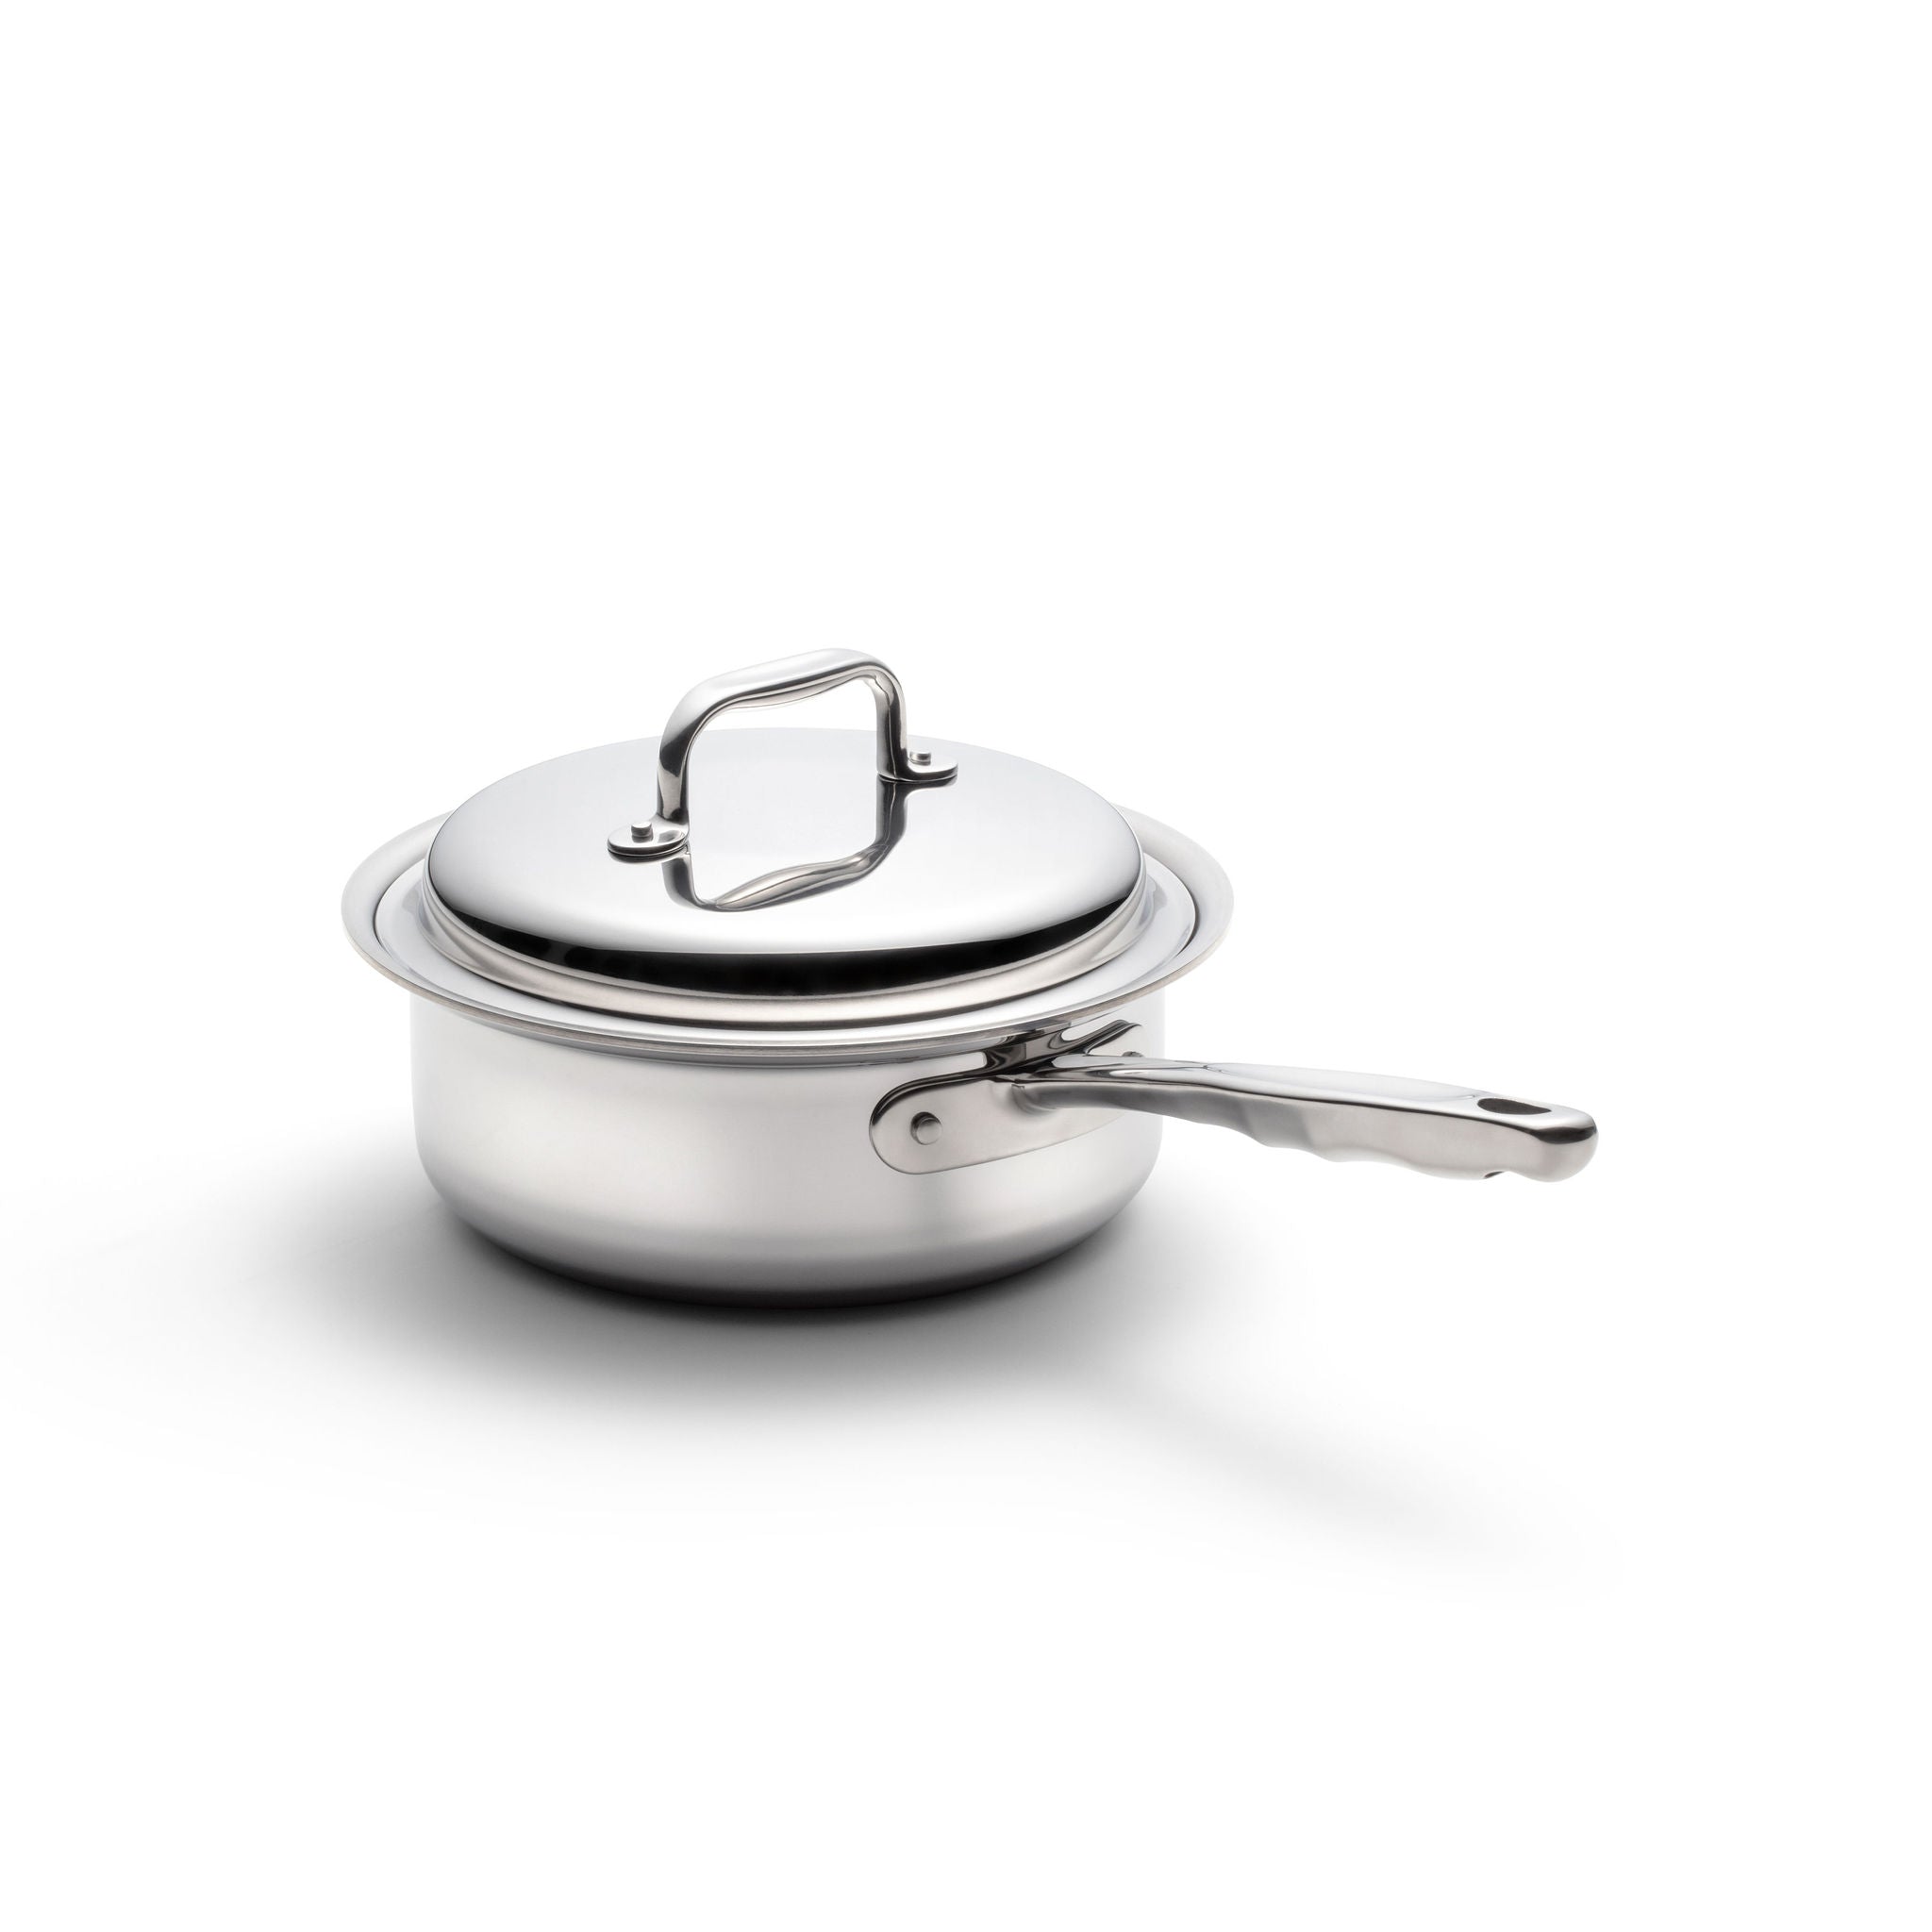 Made In Cookware - 2 Quart Stainless Steel Saucier Pan 